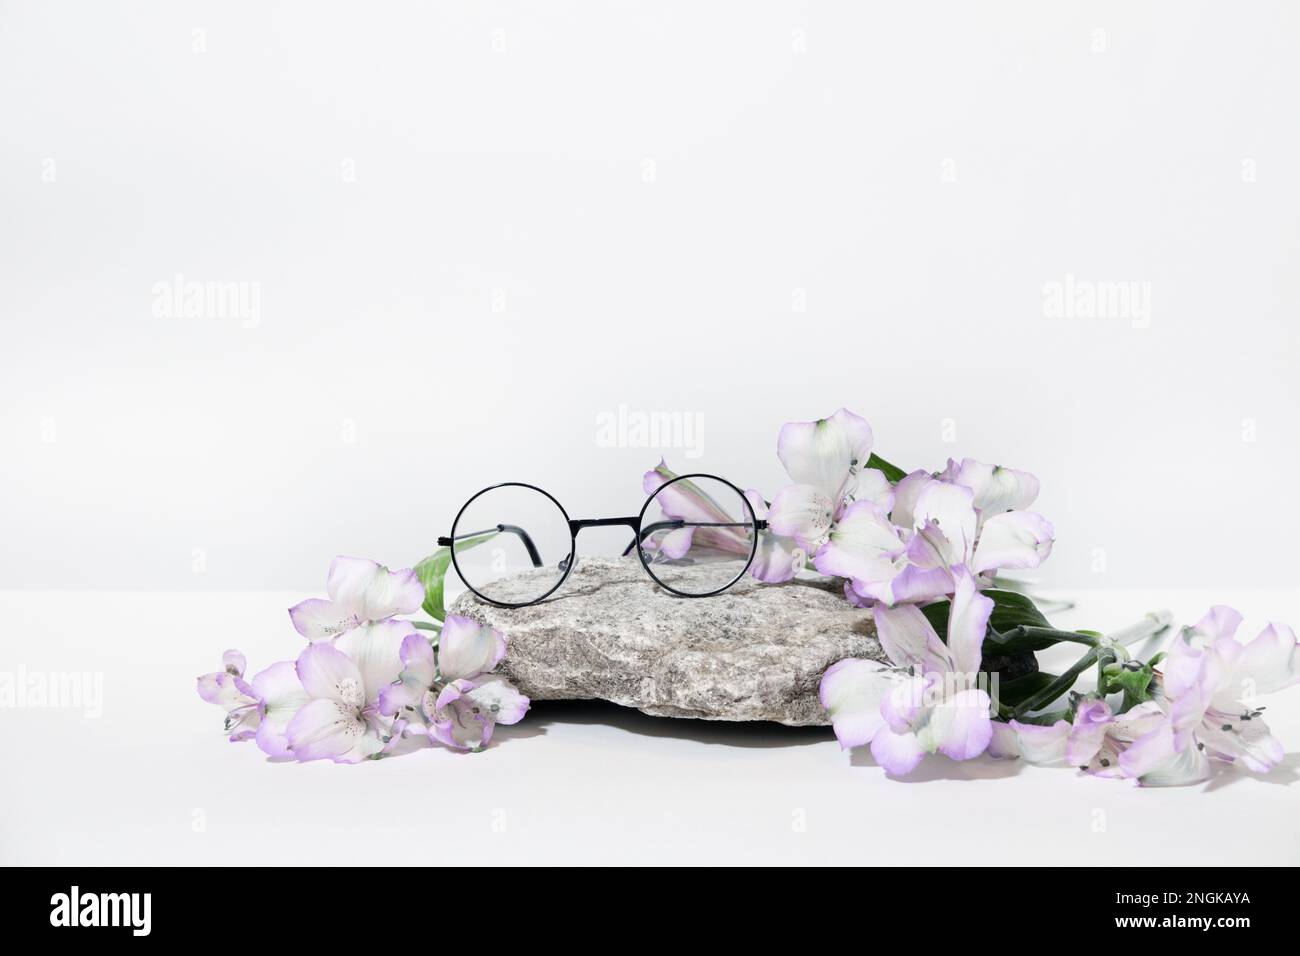 Funny round glasses from the sun or for vision, on a podium stone with pink flowers, on a table, on a white gray background. Creative glasses advertis Stock Photo